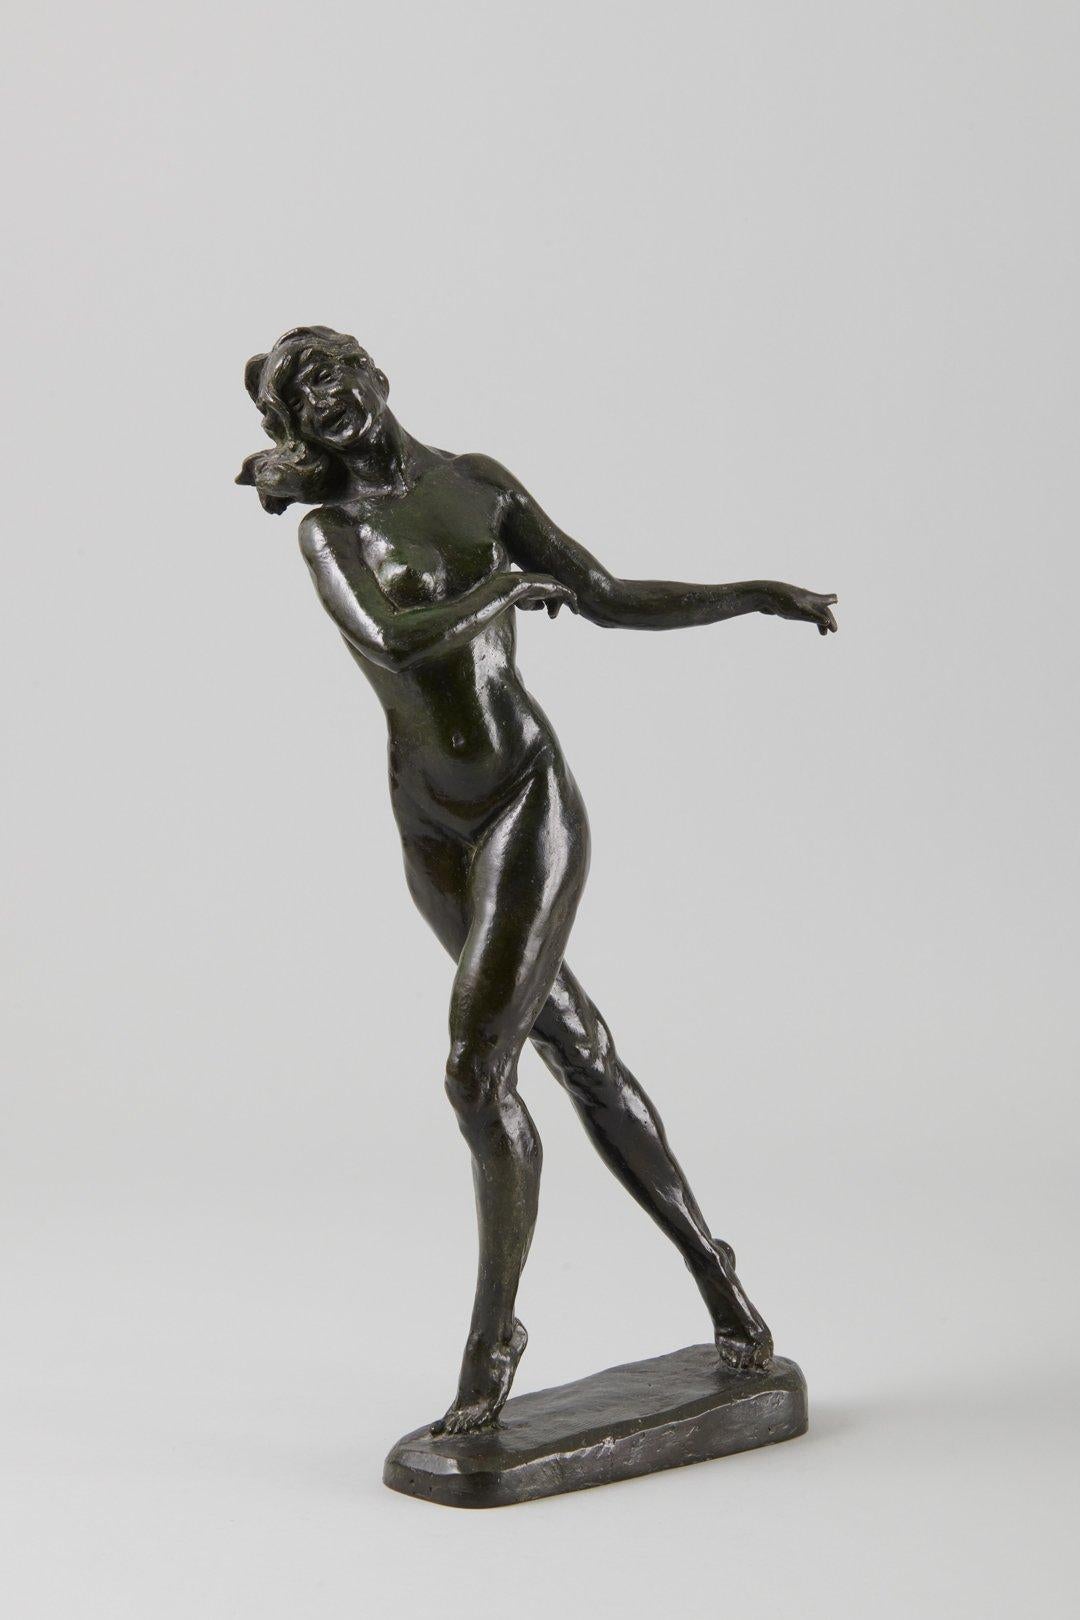 Max Kalish (American, 1891-1945)
Nude Walking, 1930
Bronze
Signed and dated on base
17 x 9 x 4 inches

Born in Poland March 1, 1891, figurative sculptor Max Kalish came to the United States in 1894, his family settling in Ohio. A talented youth,